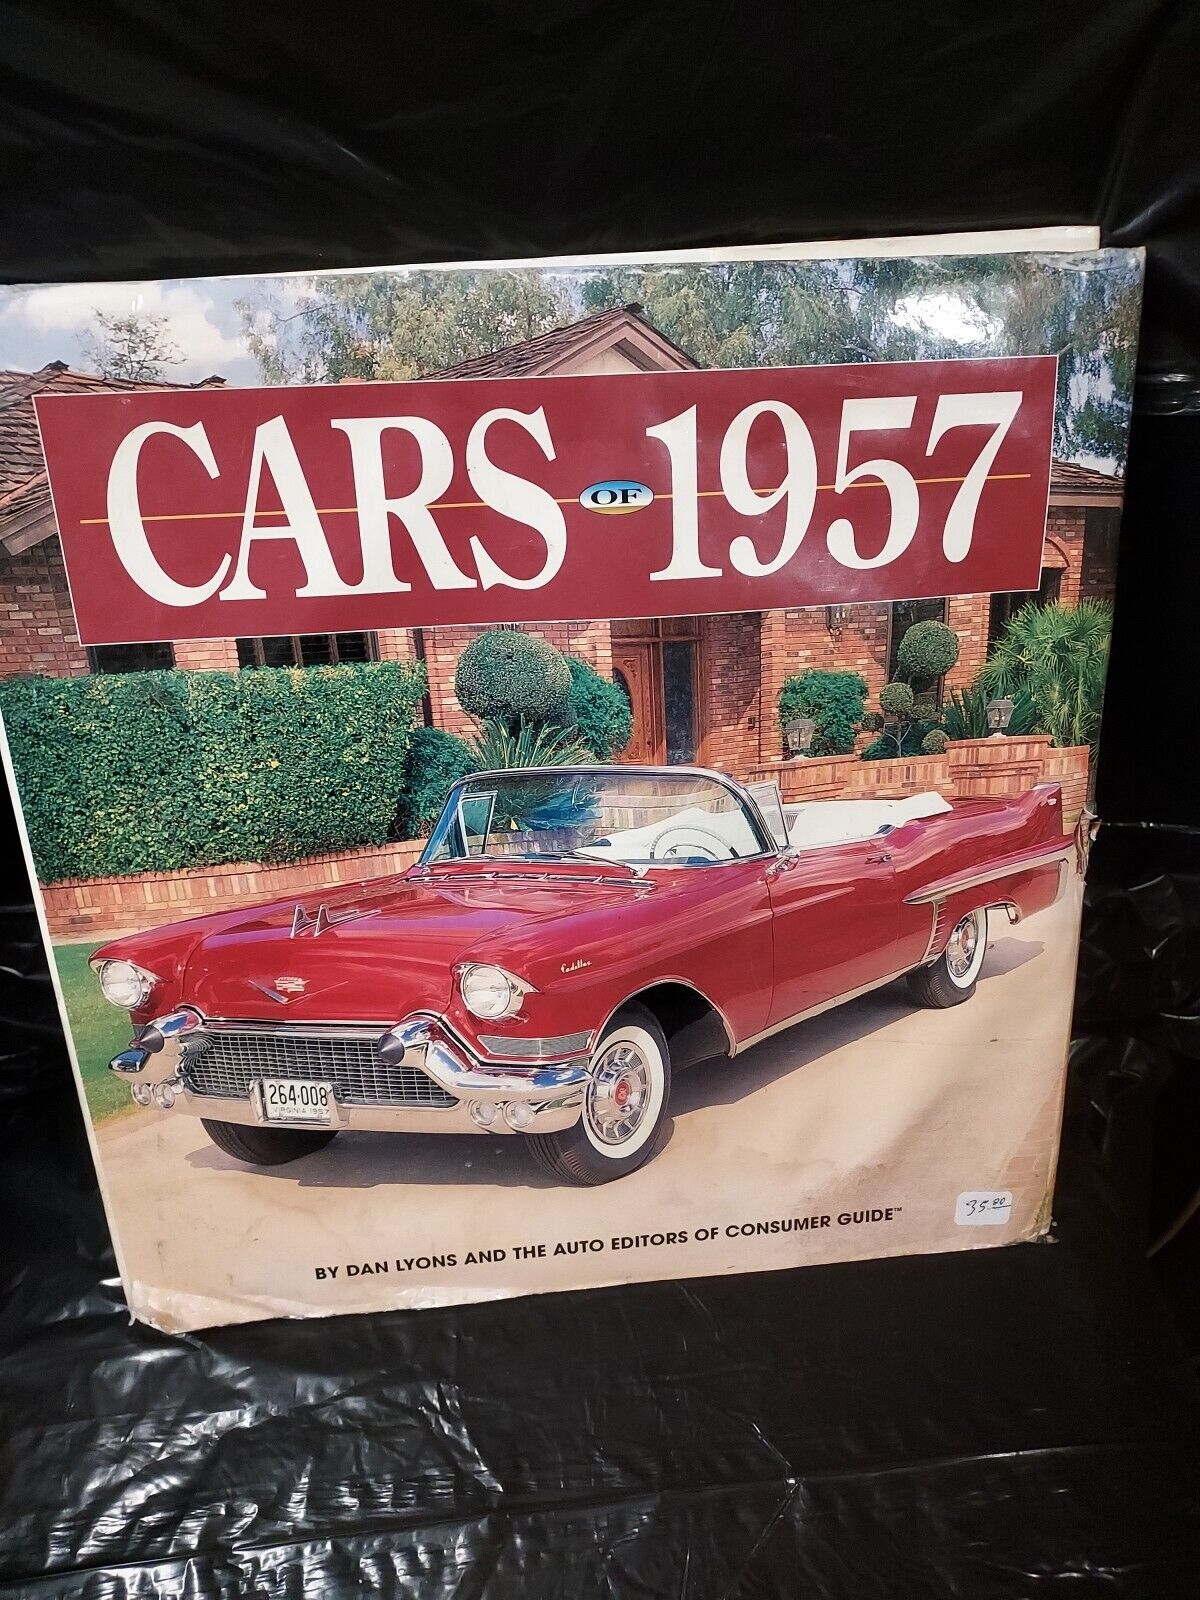 CARS OF 1957 by Dan Lyons And The Auto Editors of Consumer Guide Book ***